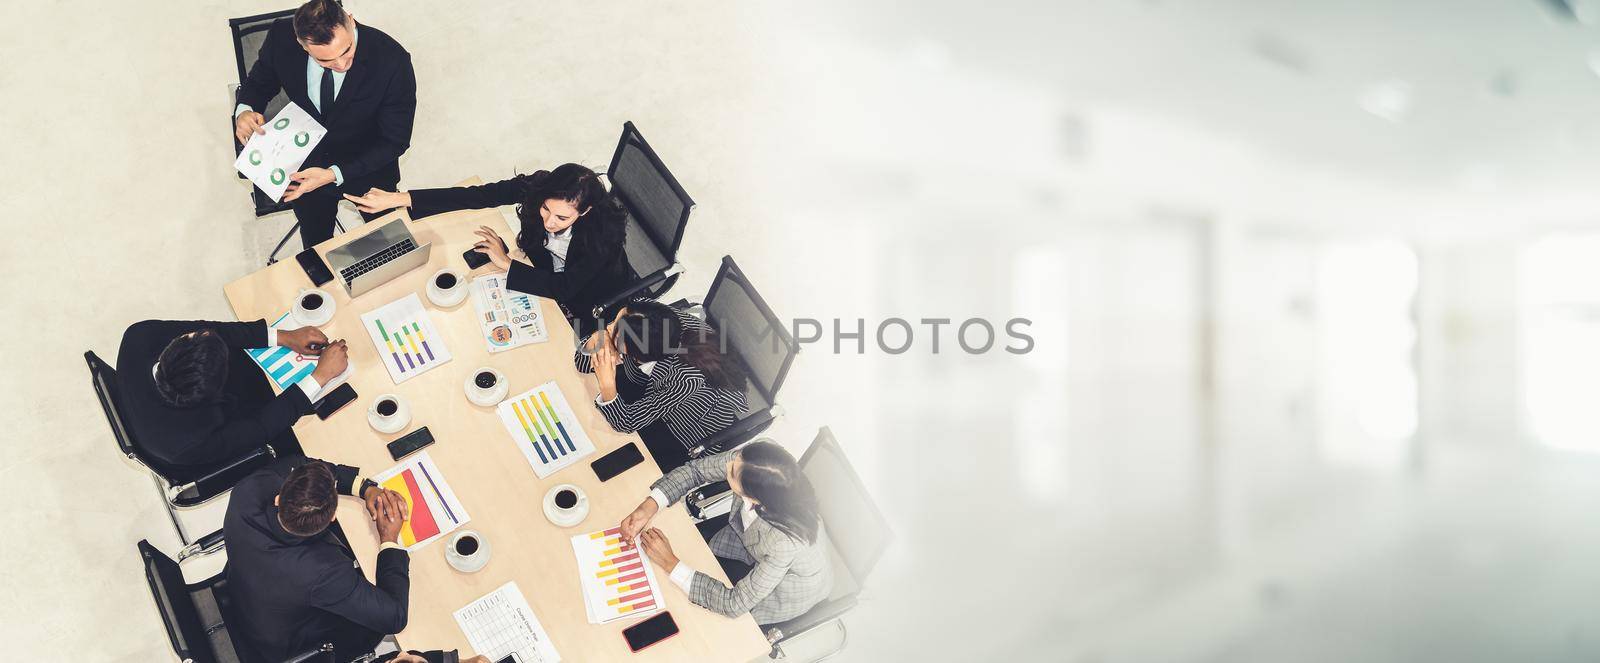 Business people group meeting shot from top view broaden view by biancoblue